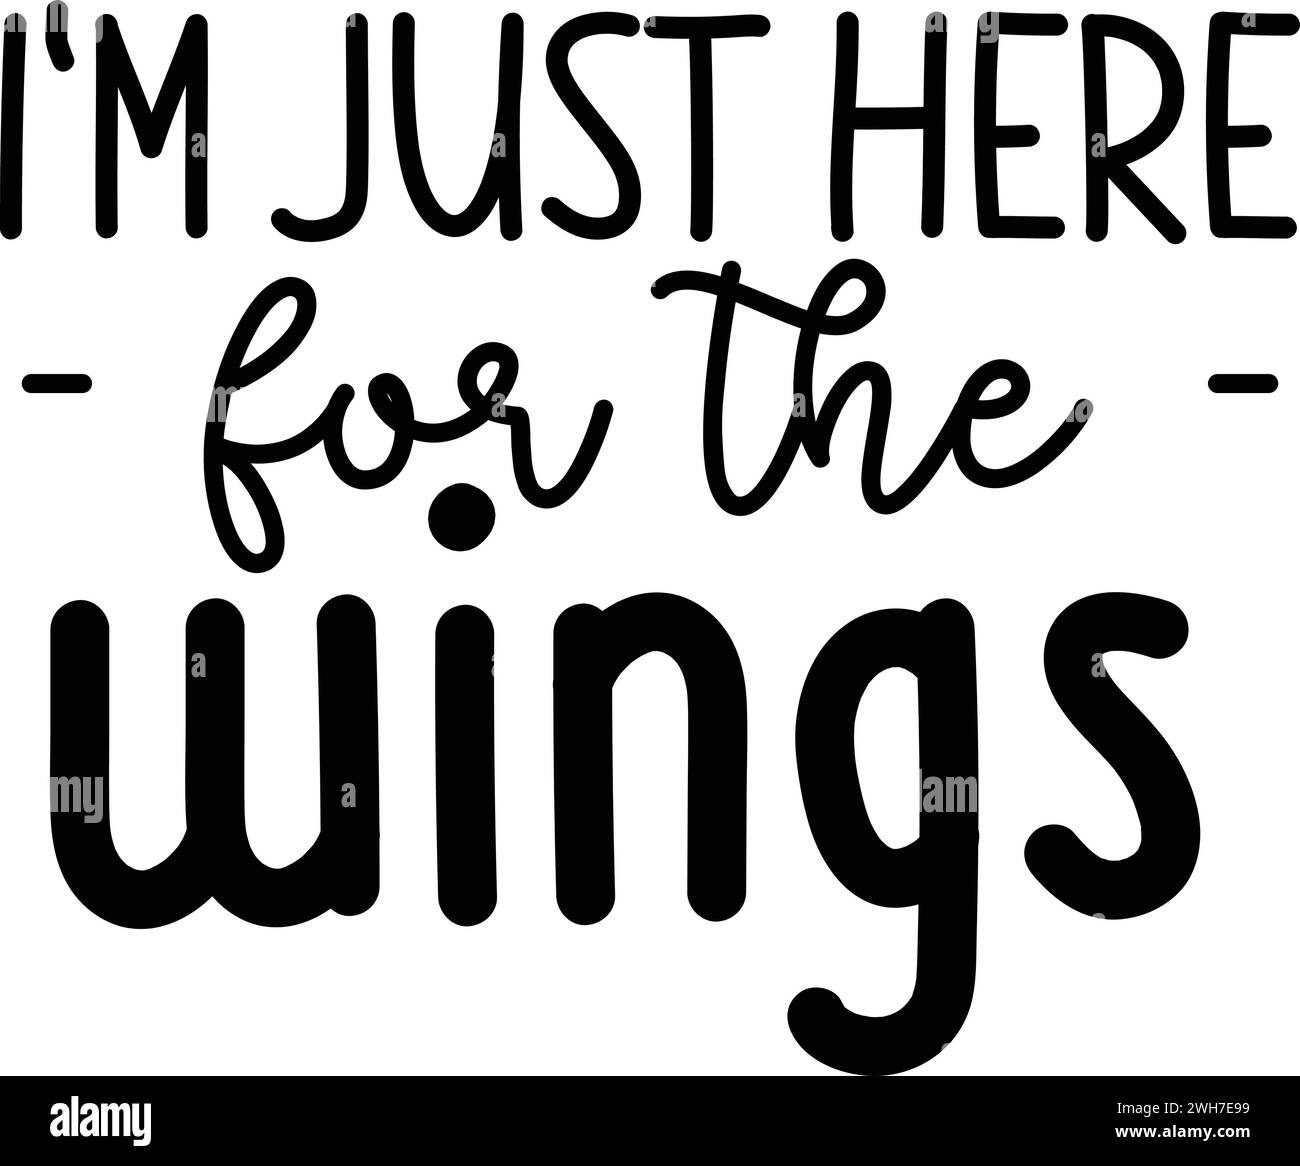 I'm Just Here for the Wings Vol - 2 ,Bowl SVG Design Printable File Stock Vector